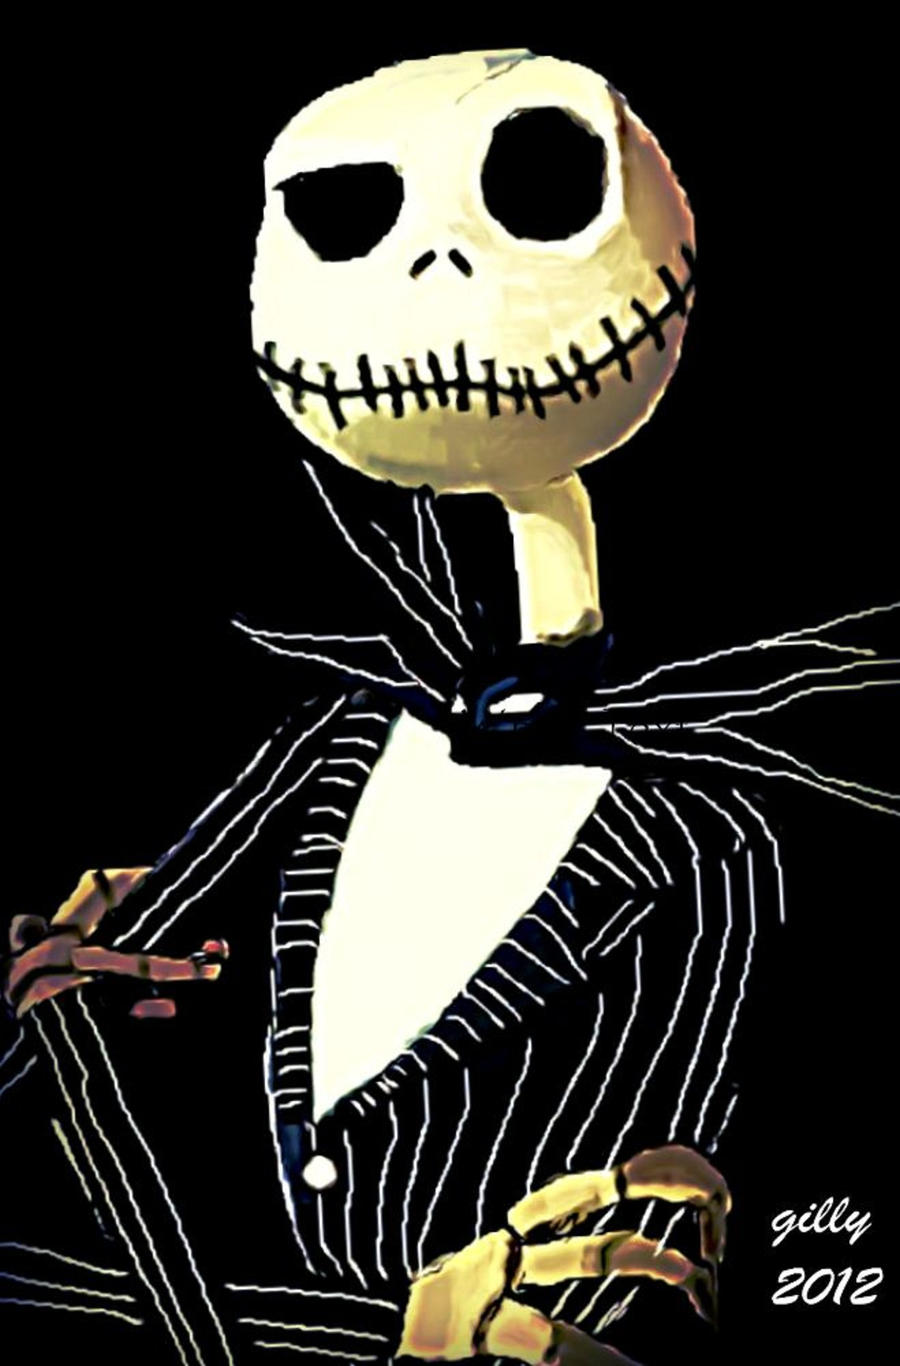 Jack The pumpkin king by gilly15 on DeviantArt